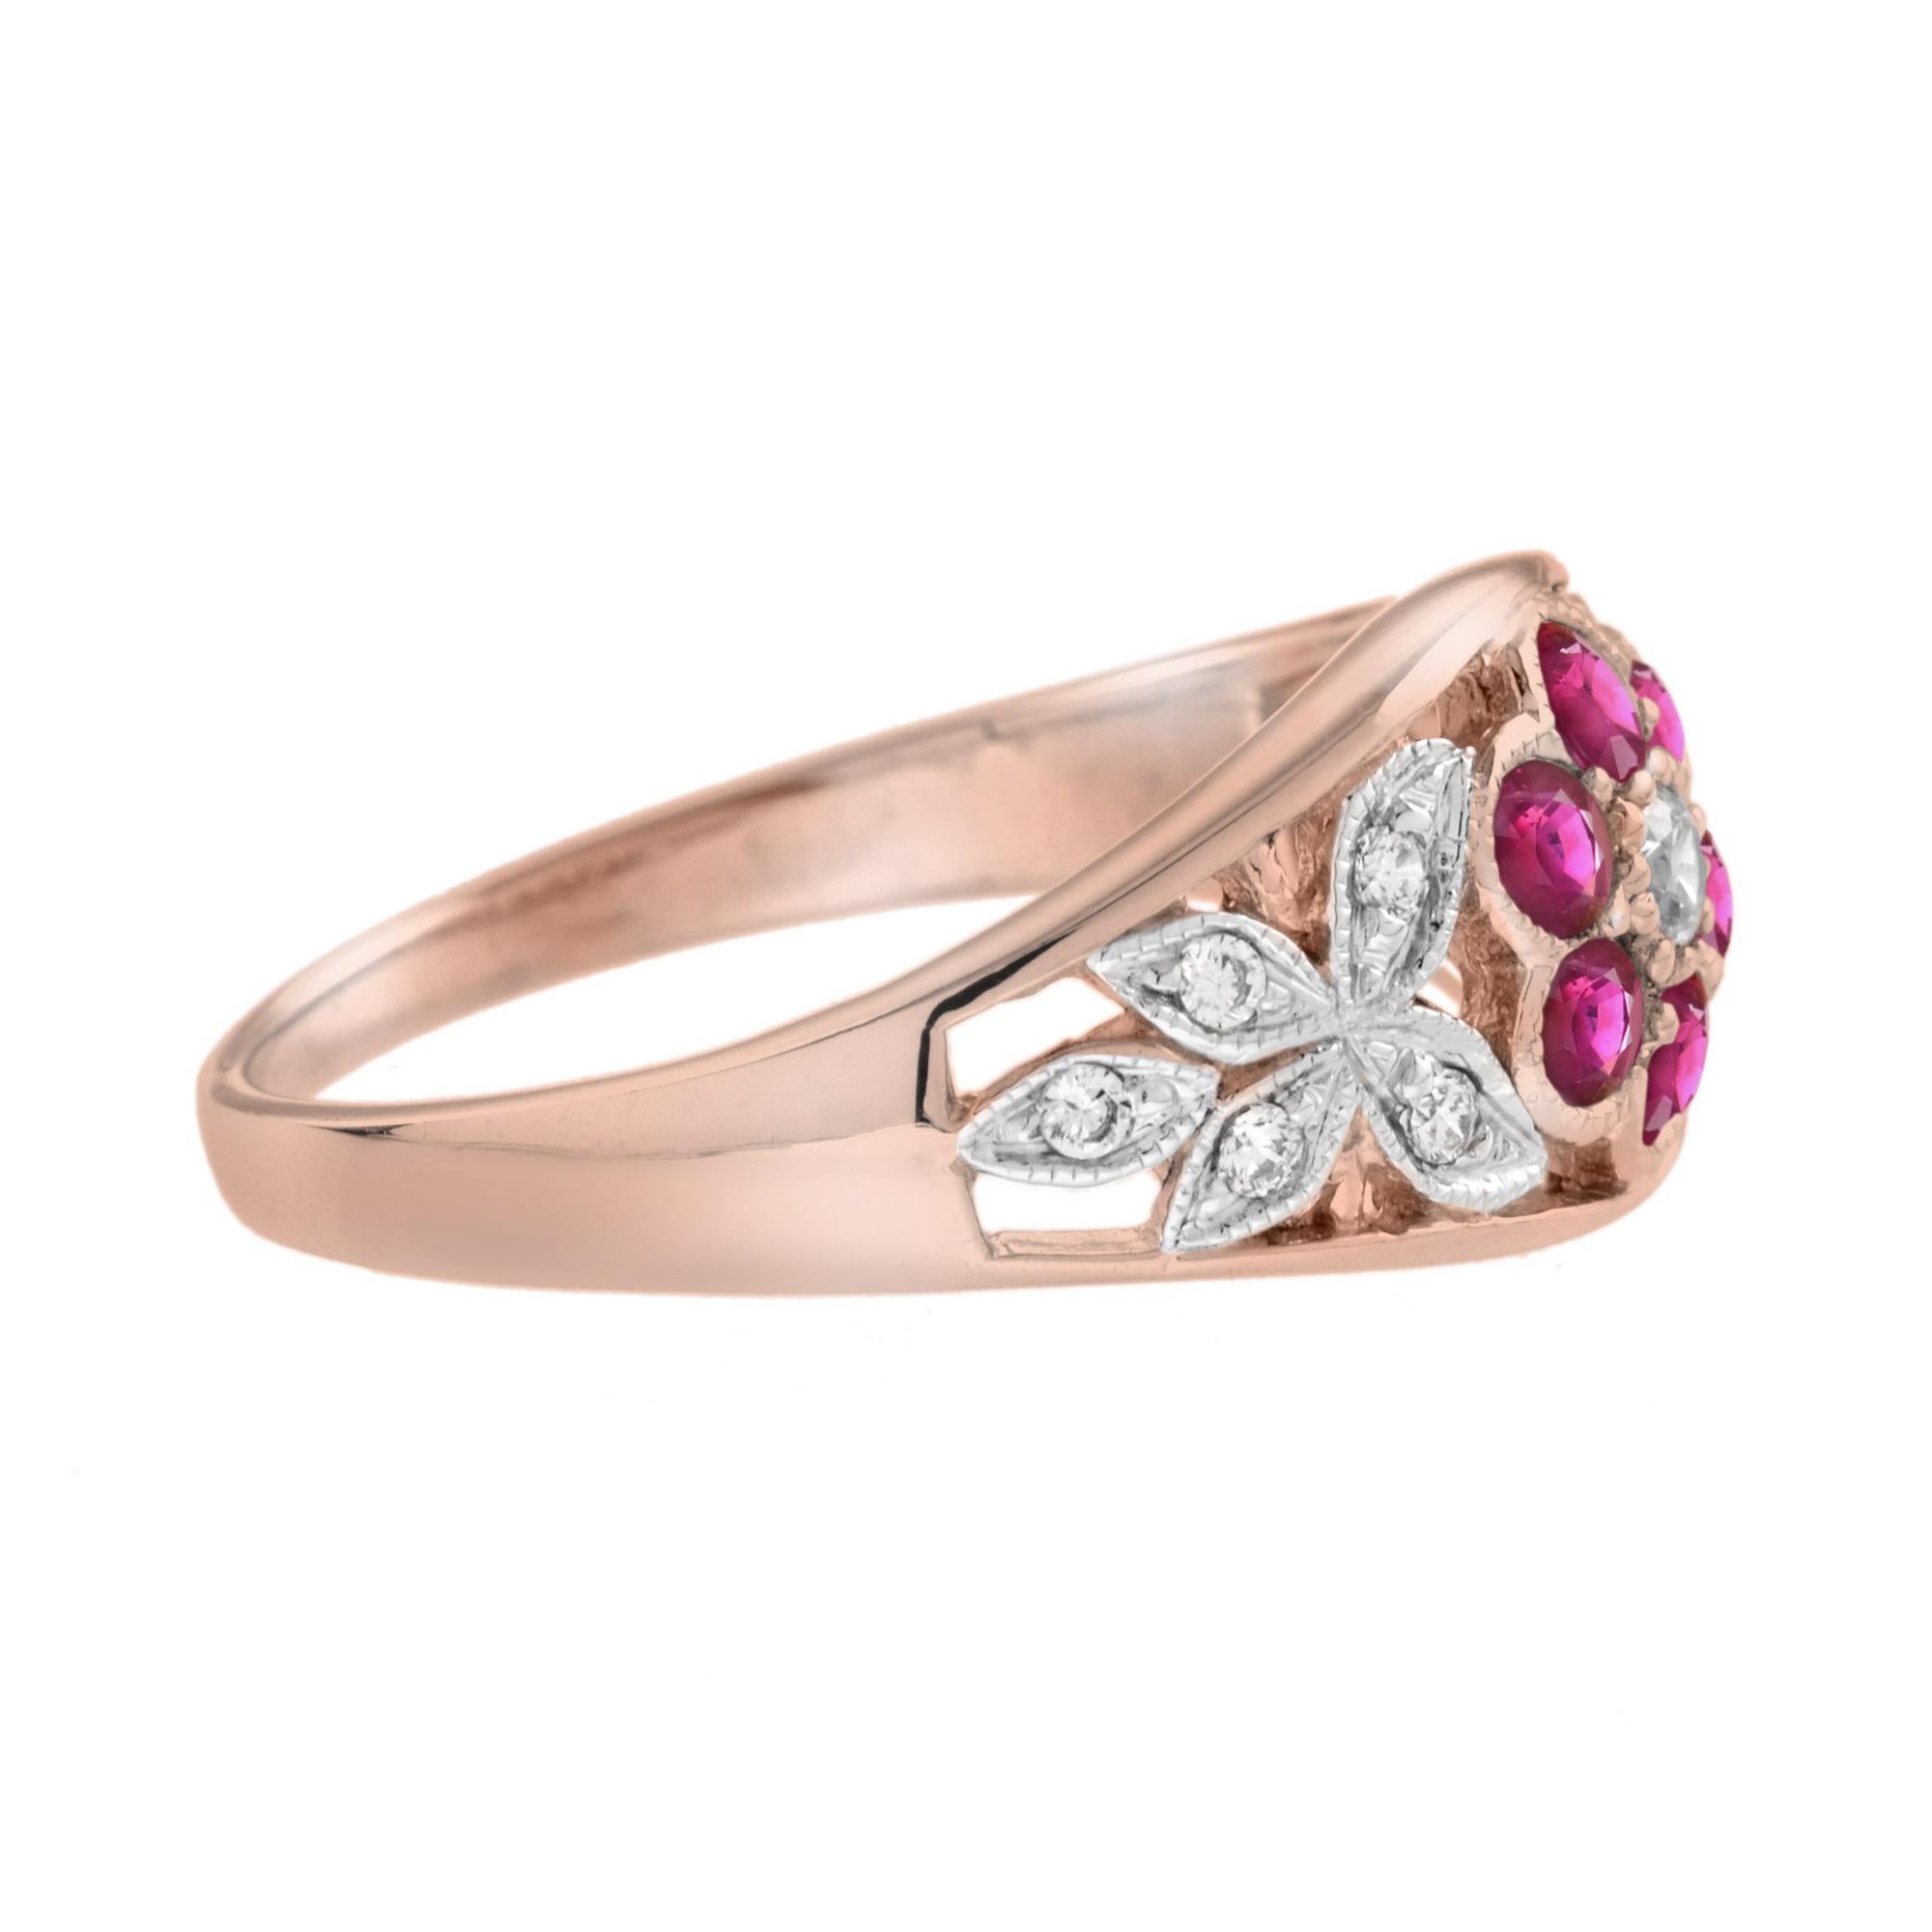 For Sale:  Diamond and Ruby Floral Cluster Engagement Ring in 14K Rose Gold 3